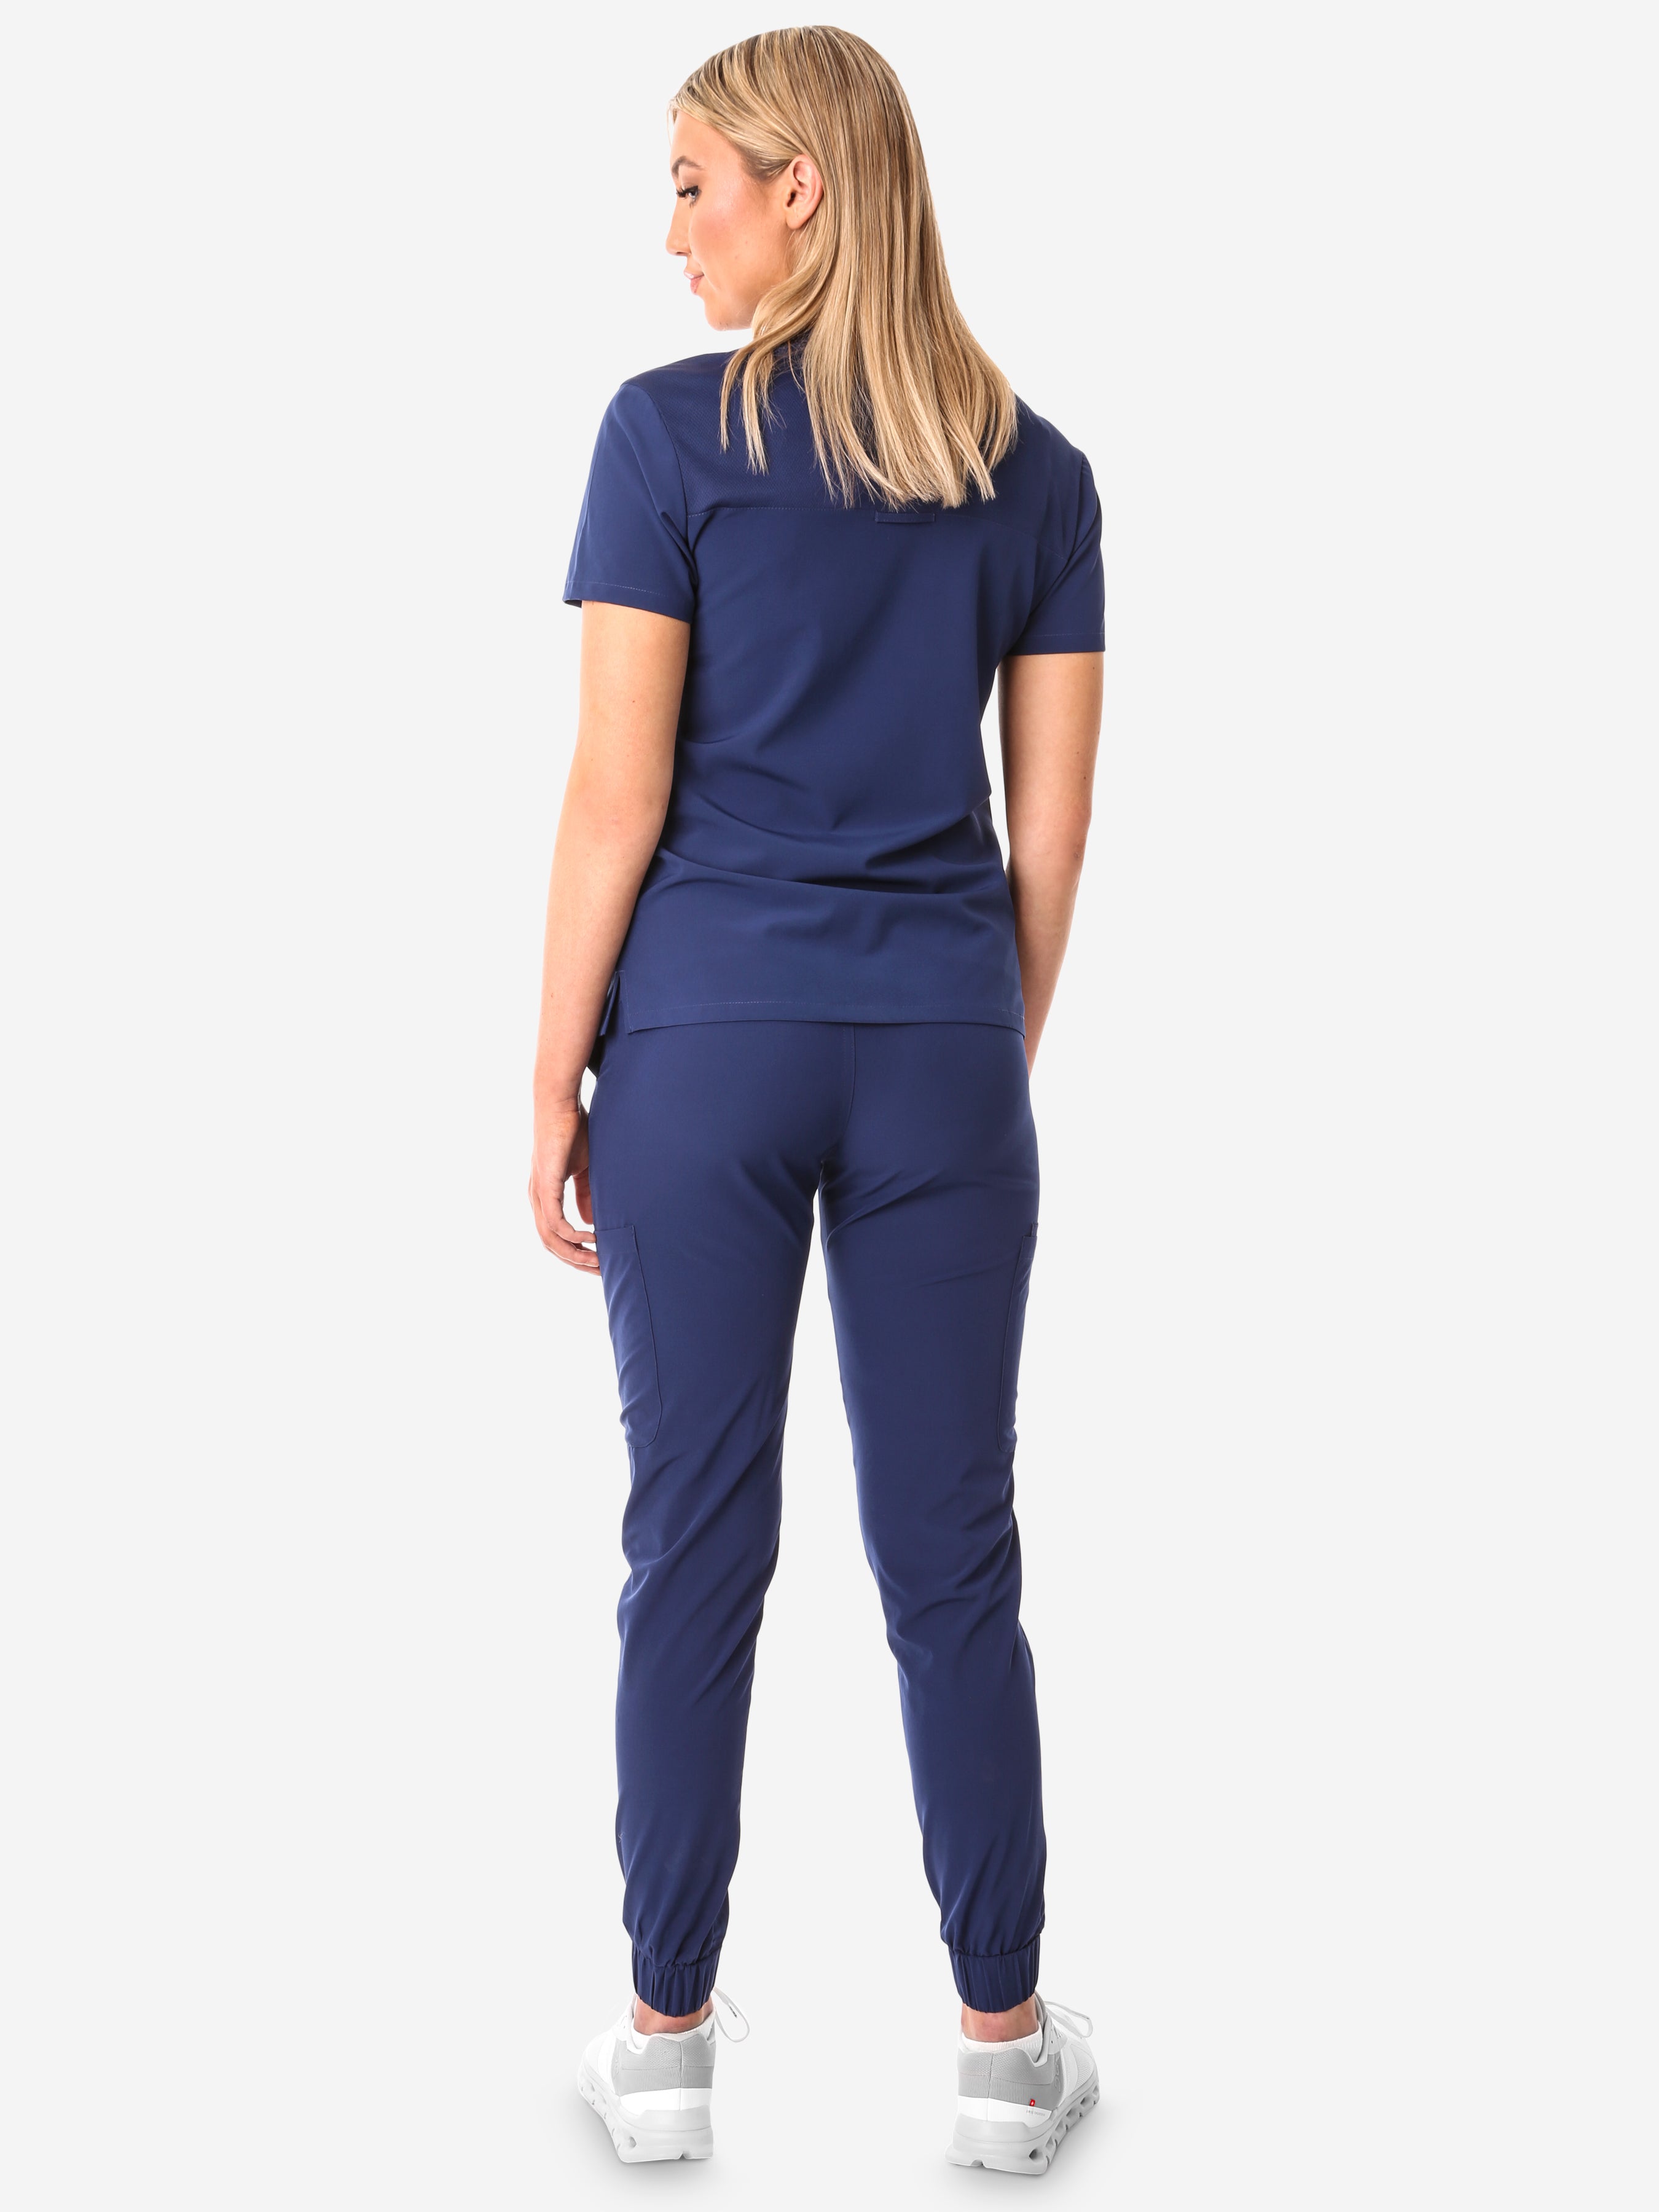 TiScrubs Women&#39;s Stretch Navy Blue One-Pocket Scrub Top Untucked and Joggers Back View Full Body